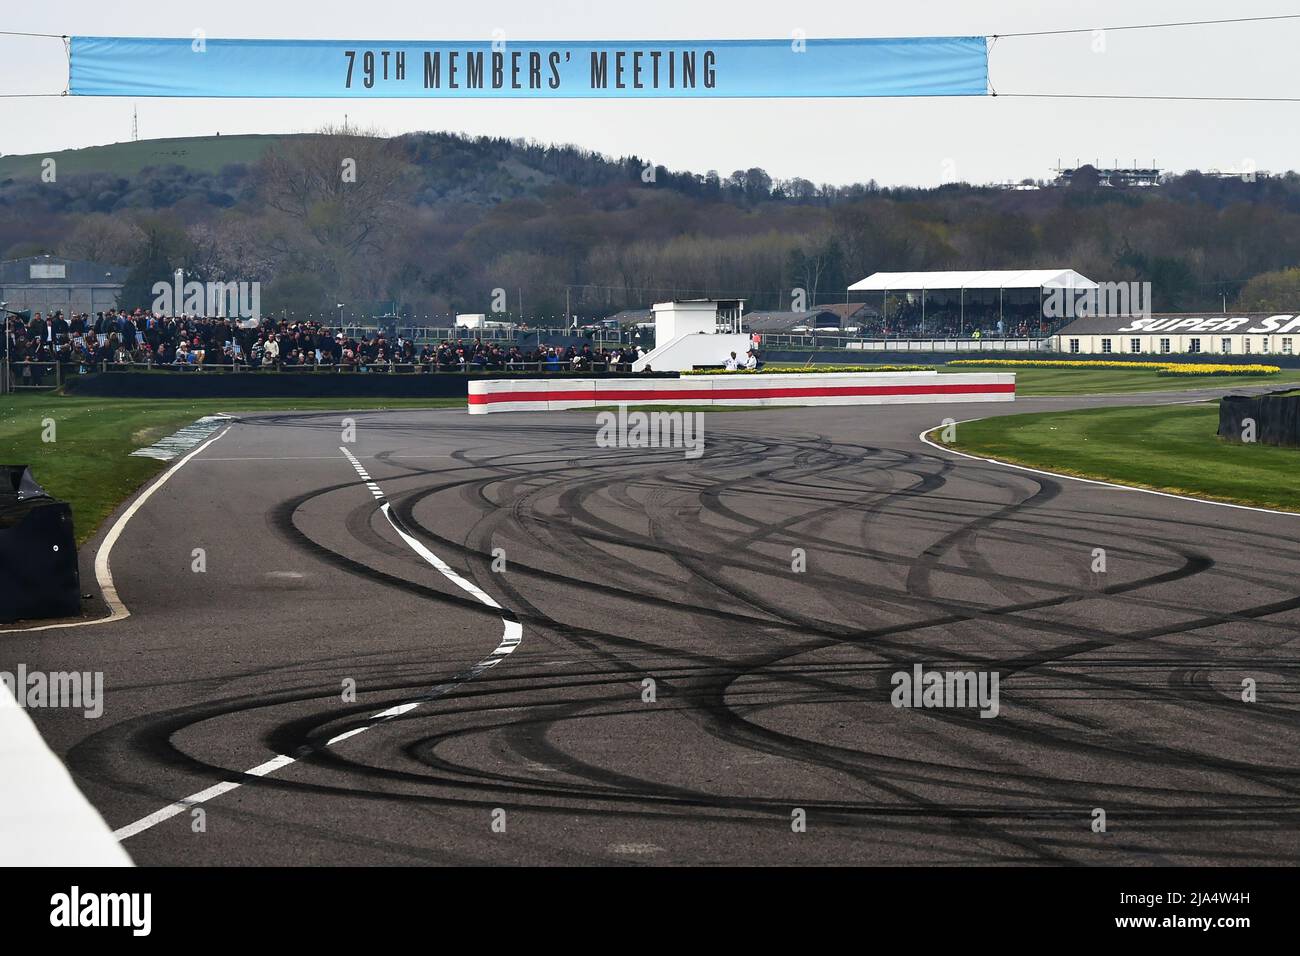 Tyre tracks, the aftermath, Drift demonstration, Goodwood 79th Members Meeting, Goodwood Motor Circuit, Chichester, West Sussex, England, April 2022. Stock Photo